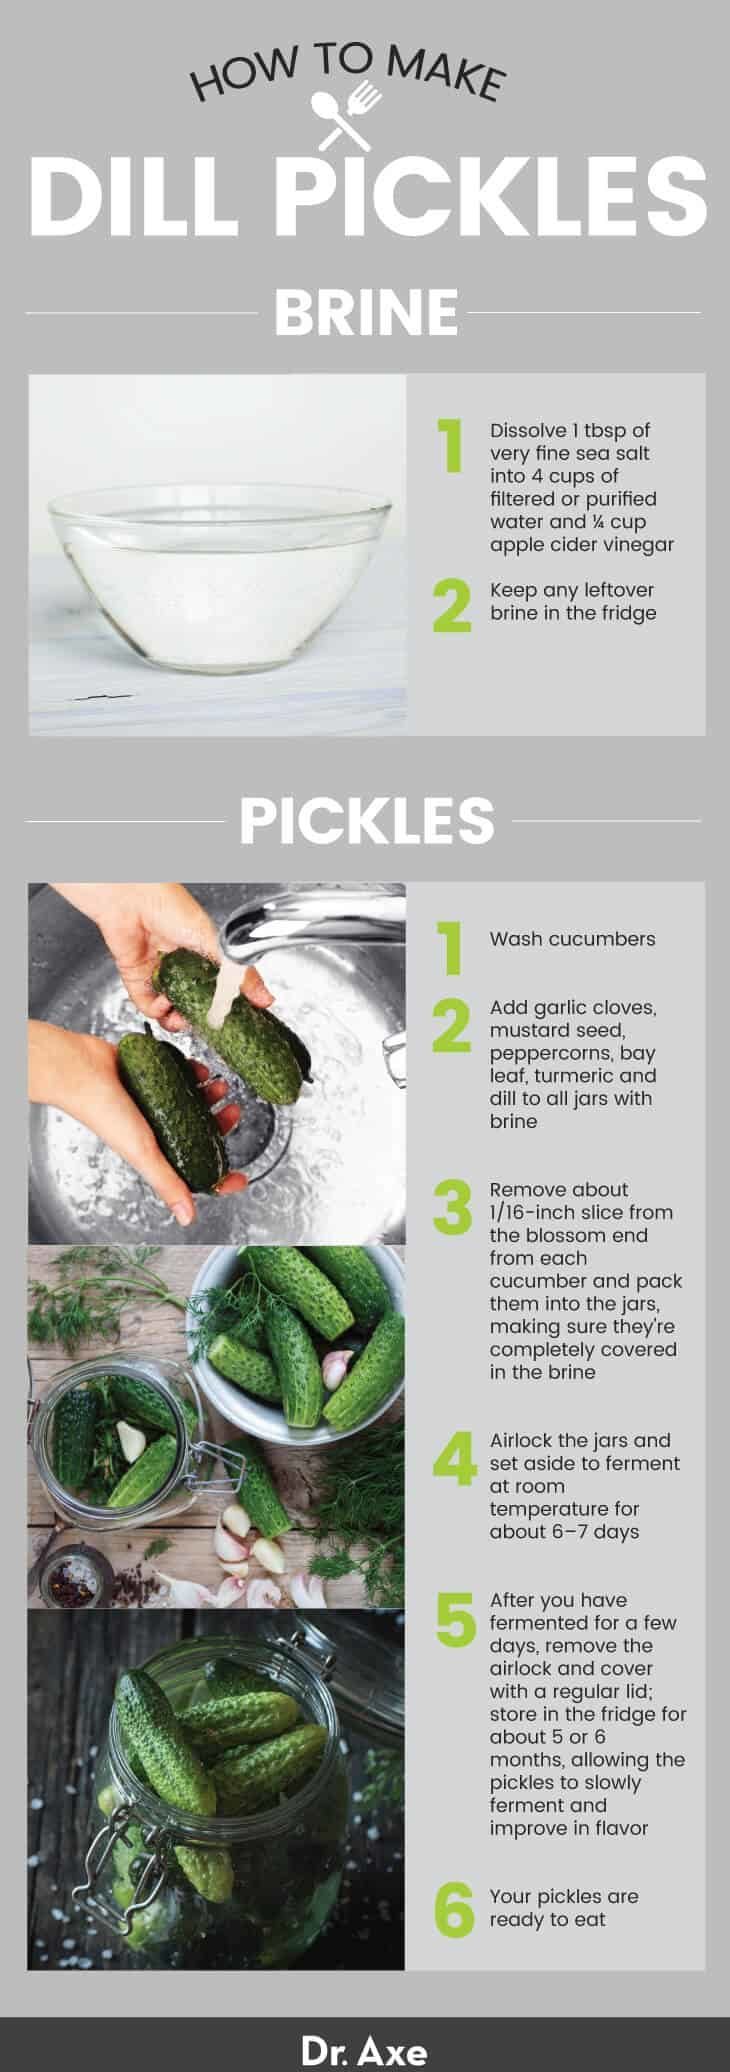 How to make dill pickles - Dr. Axe